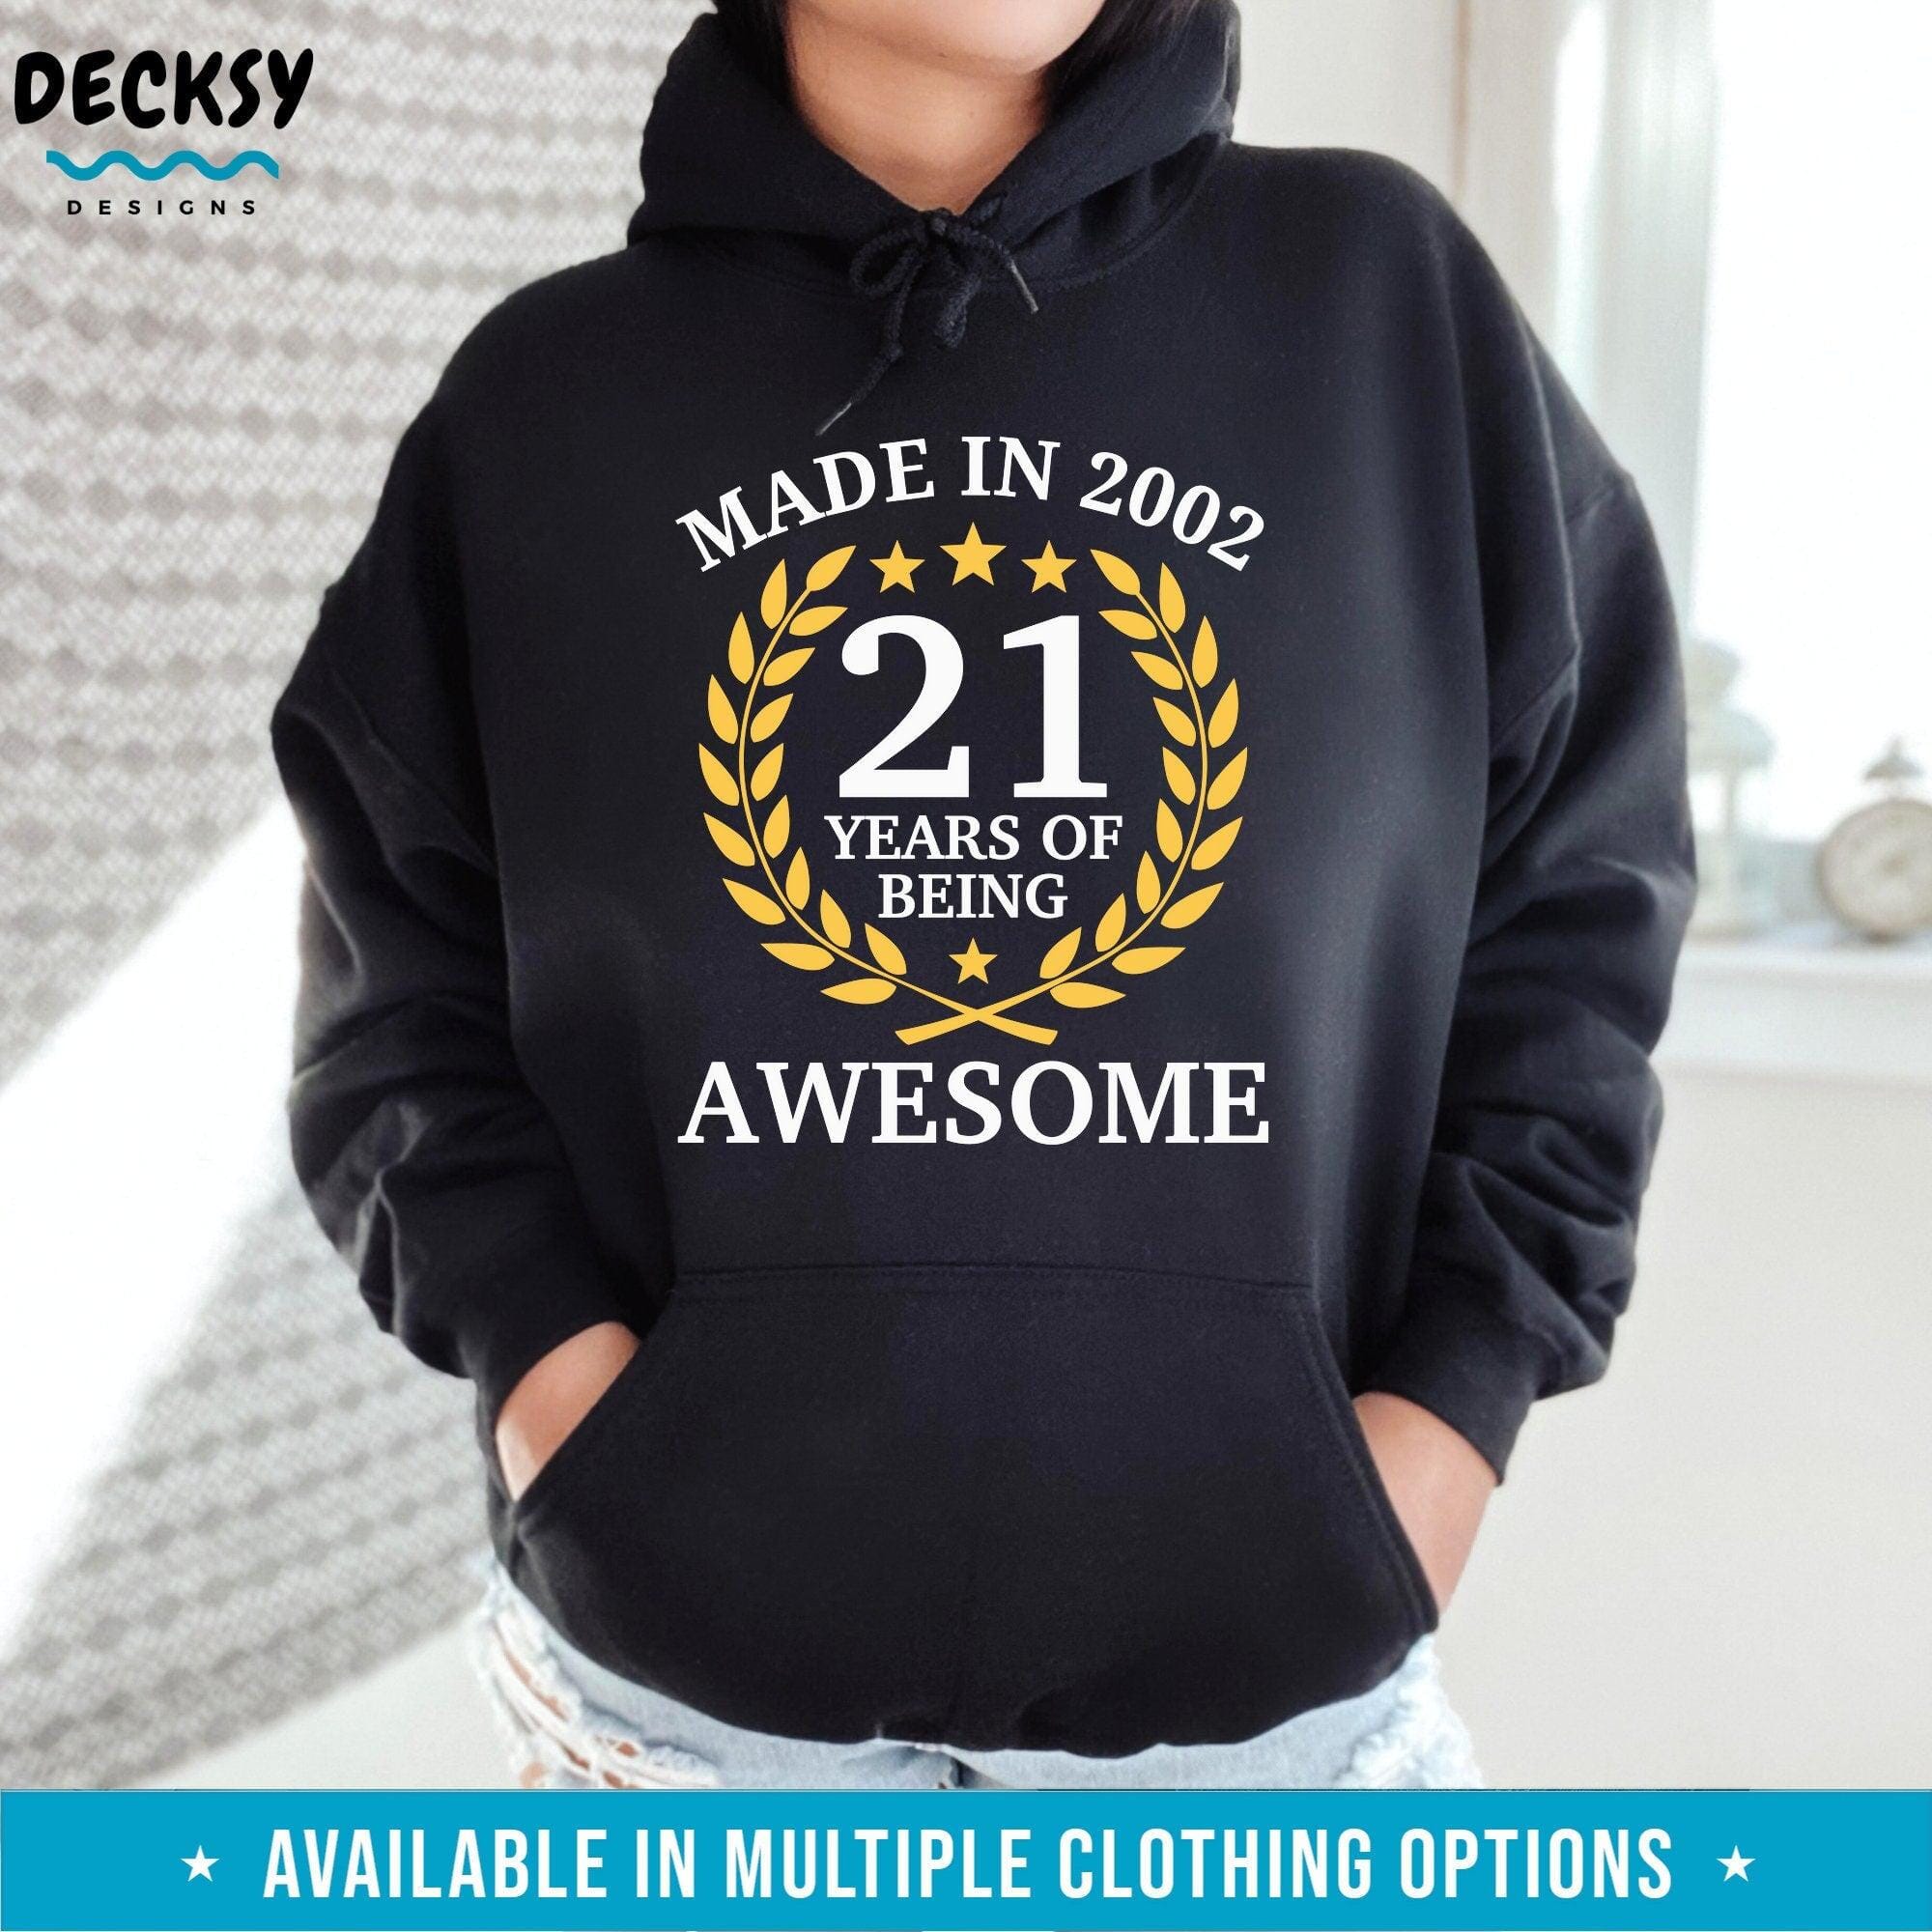 21st Birthday Tshirt, Born In 2002 Shirt, Happy Birthday Gift-Clothing:Gender-Neutral Adult Clothing:Tops & Tees:T-shirts:Graphic Tees-DecksyDesigns